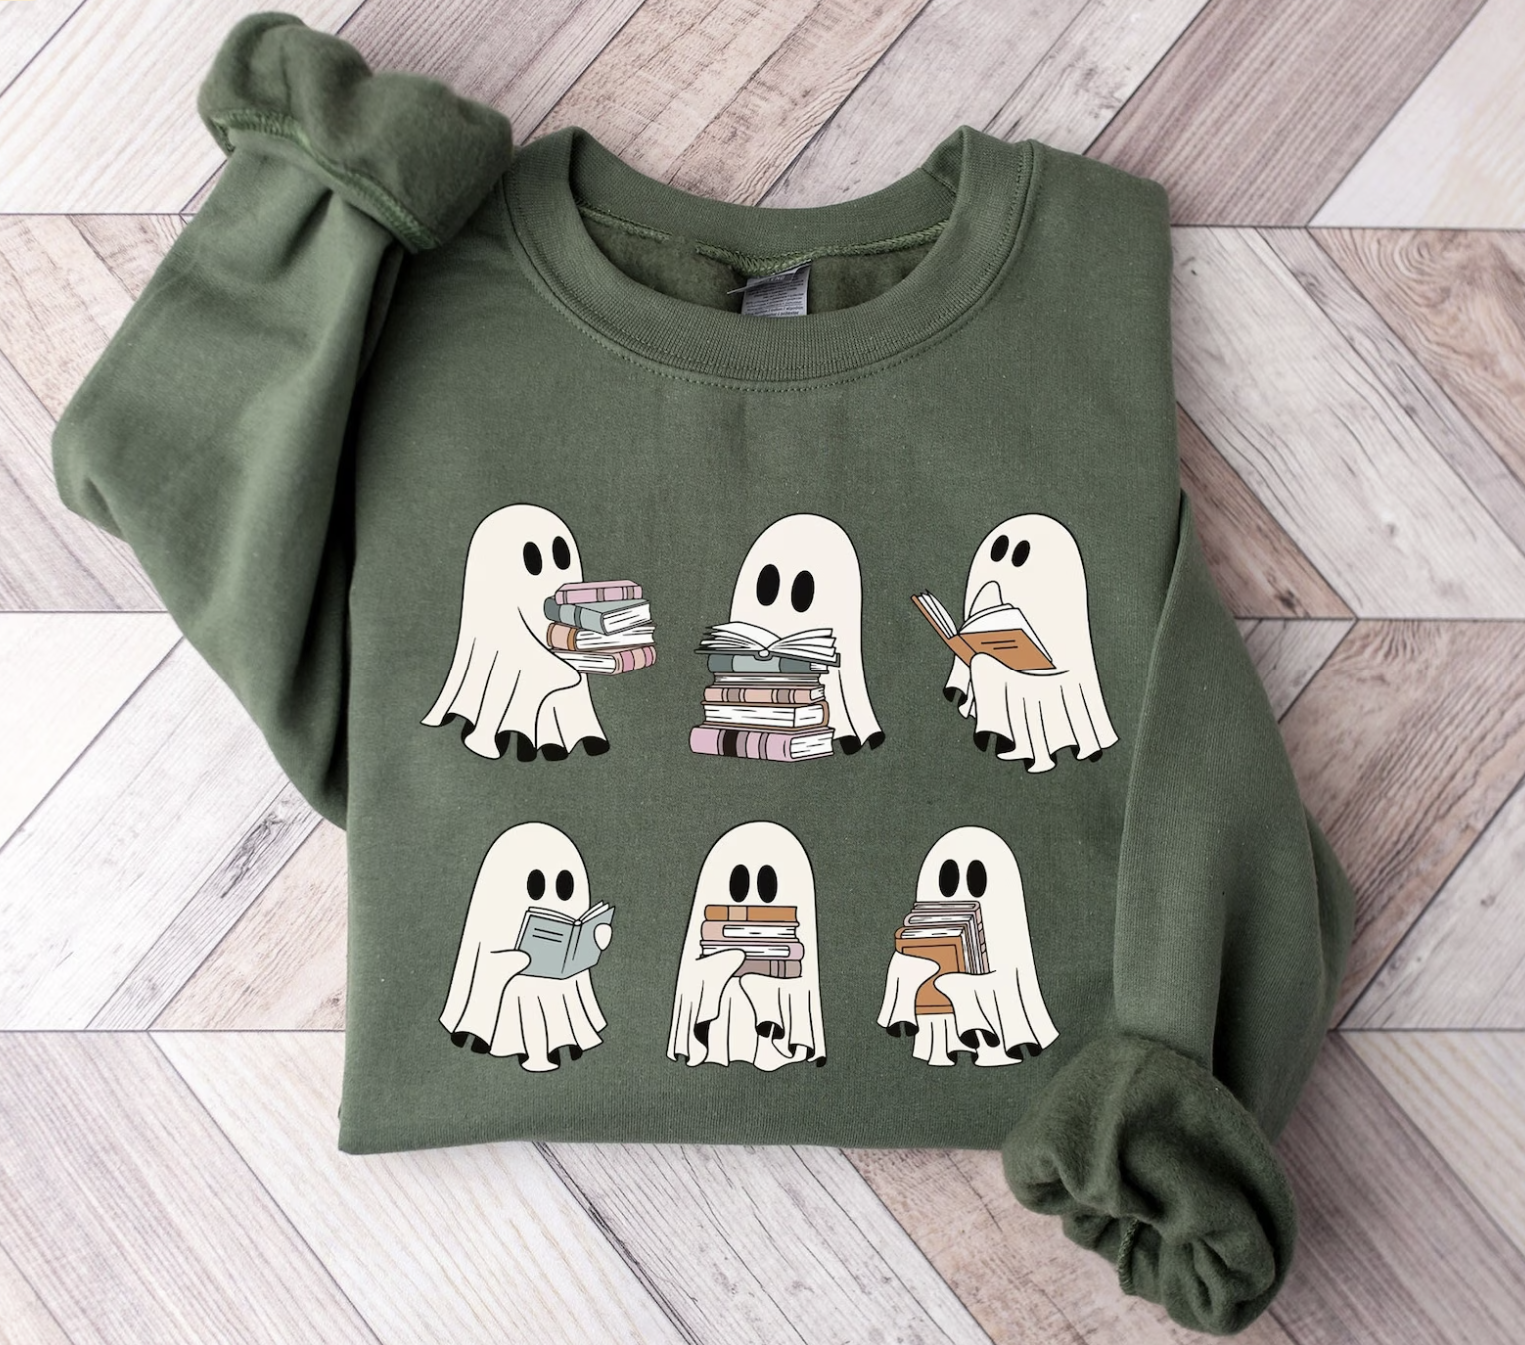 Sage green sweatshirt featuring six cute illustrated ghosts in two rows holding stacks of books.